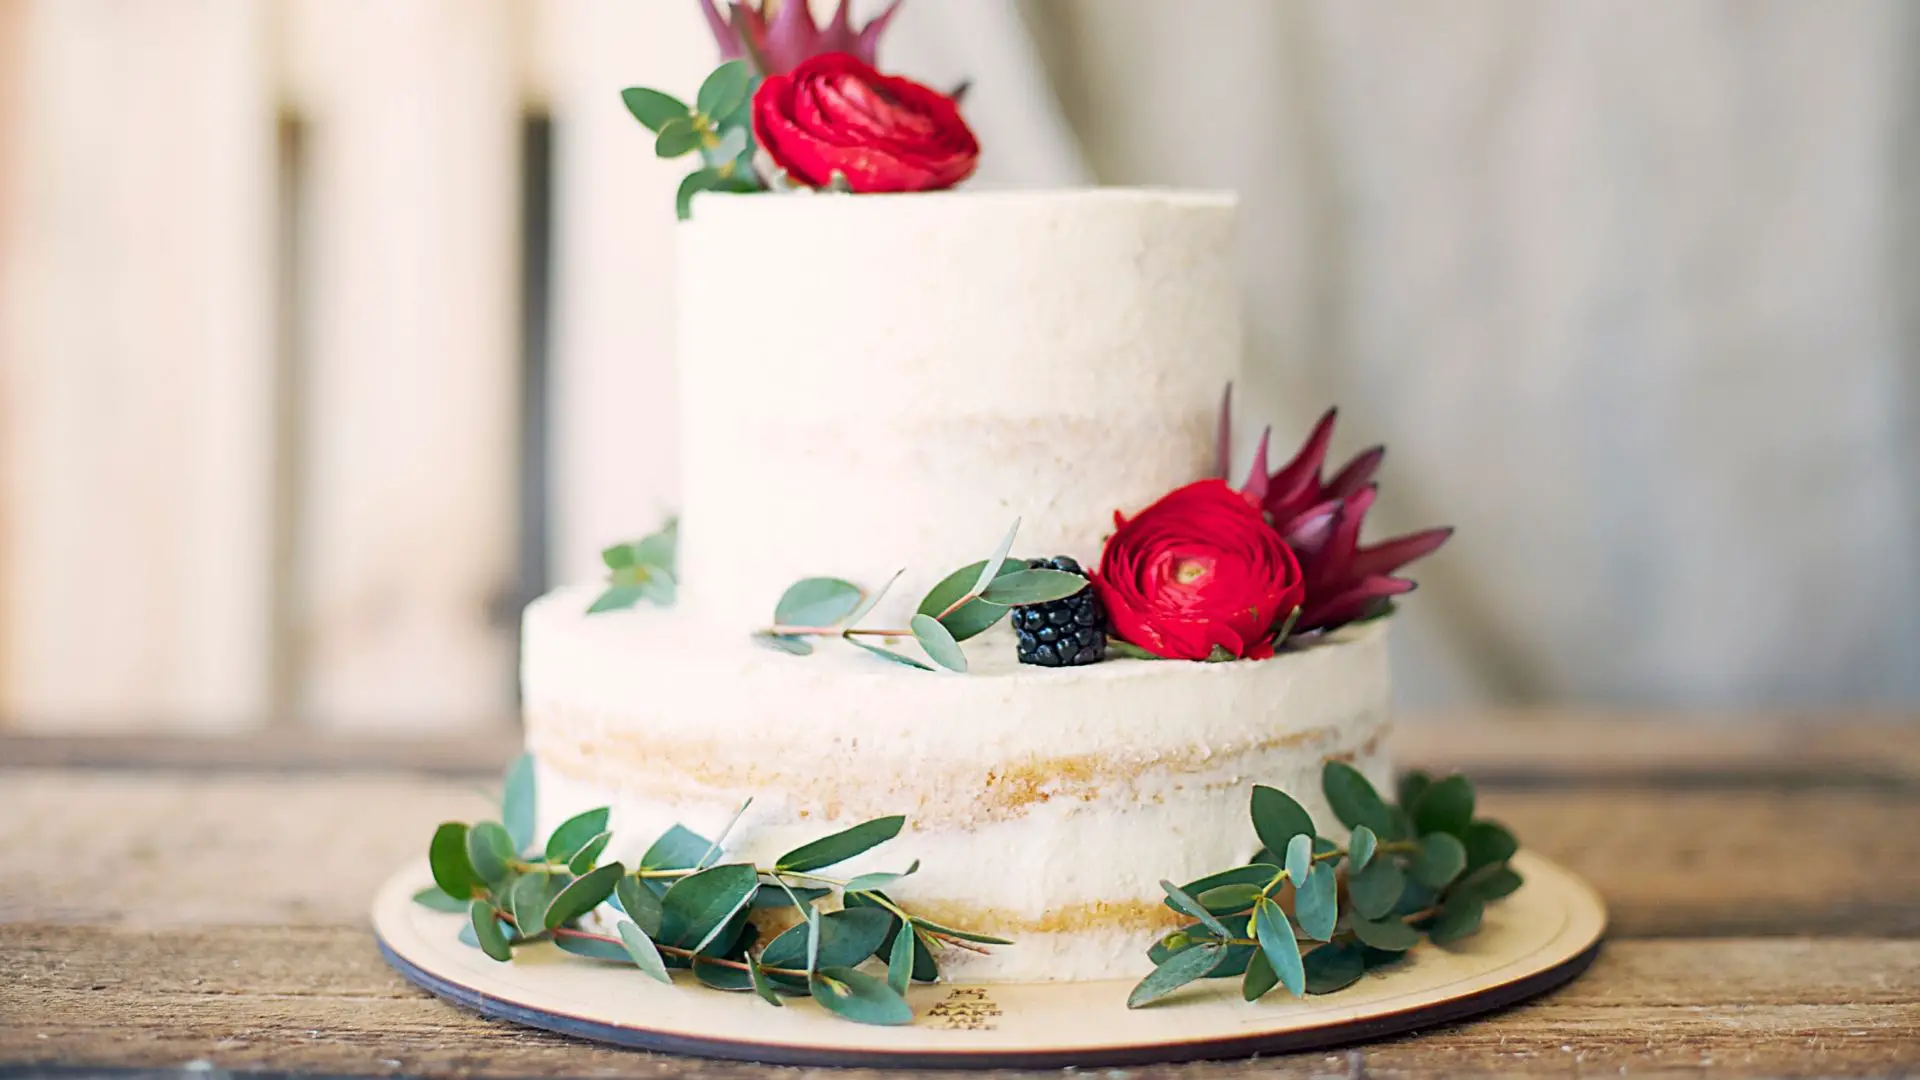 Price of Wedding Cakes in 2022: What You Don’t Know